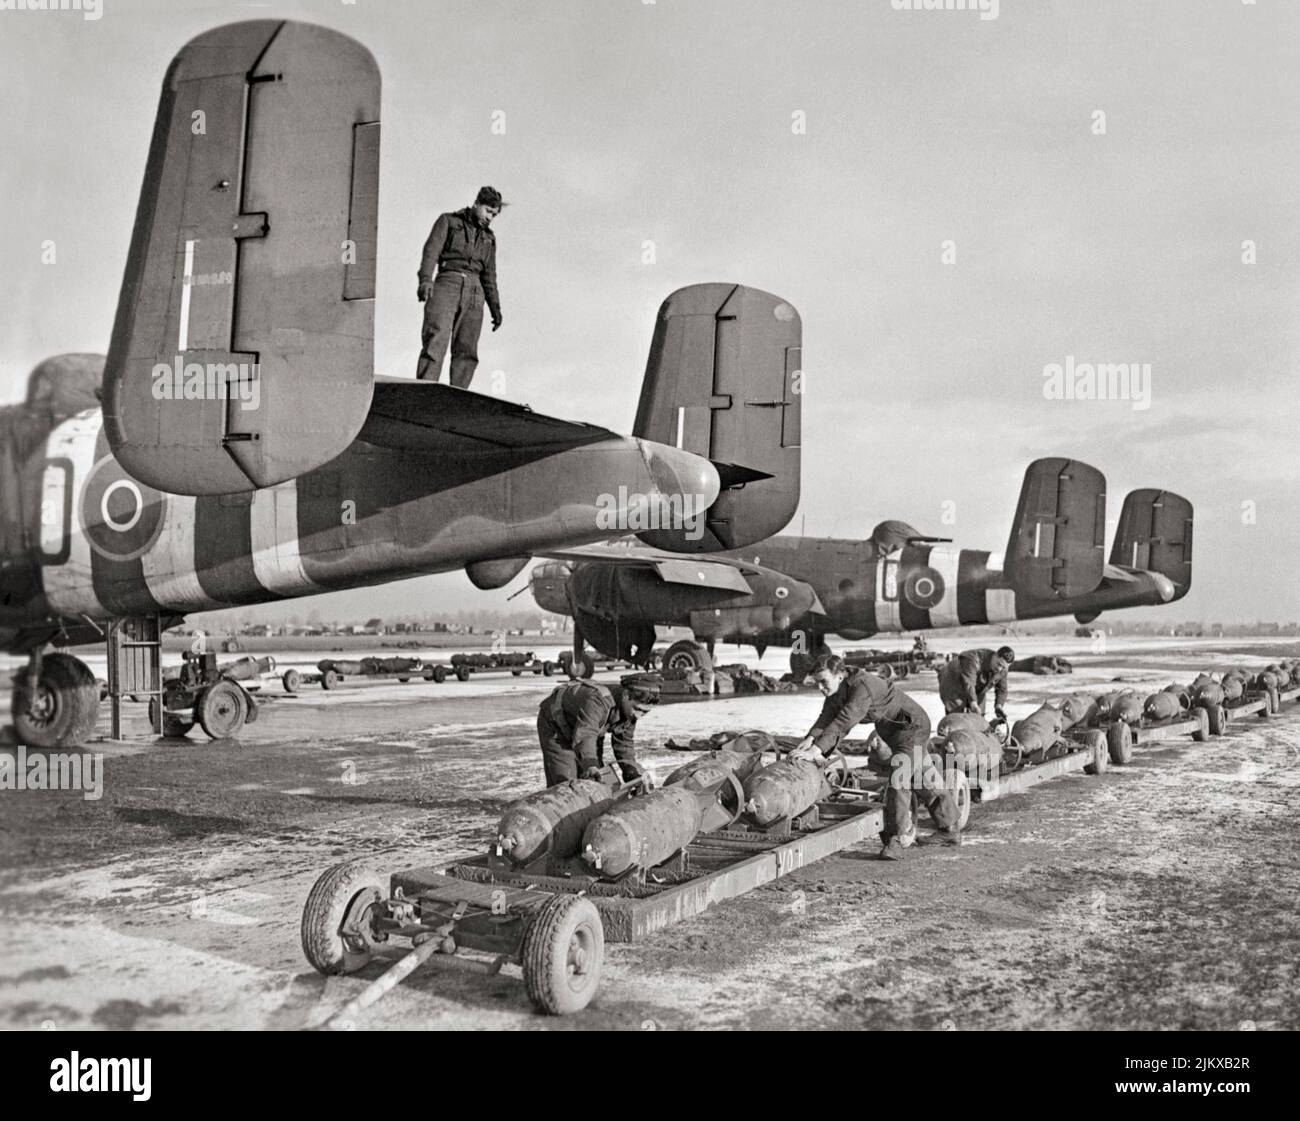 RAF and Dutch naval ground crews prepare to load 500-lb MC bombs into North American Mitchell Mark IIs of No. 98 Squadron RAF, during wintry conditions in Belgium. The North American B-25 Mitchell was a medium bomber introduced in 1941 and used by many Allied air forces. Stock Photo